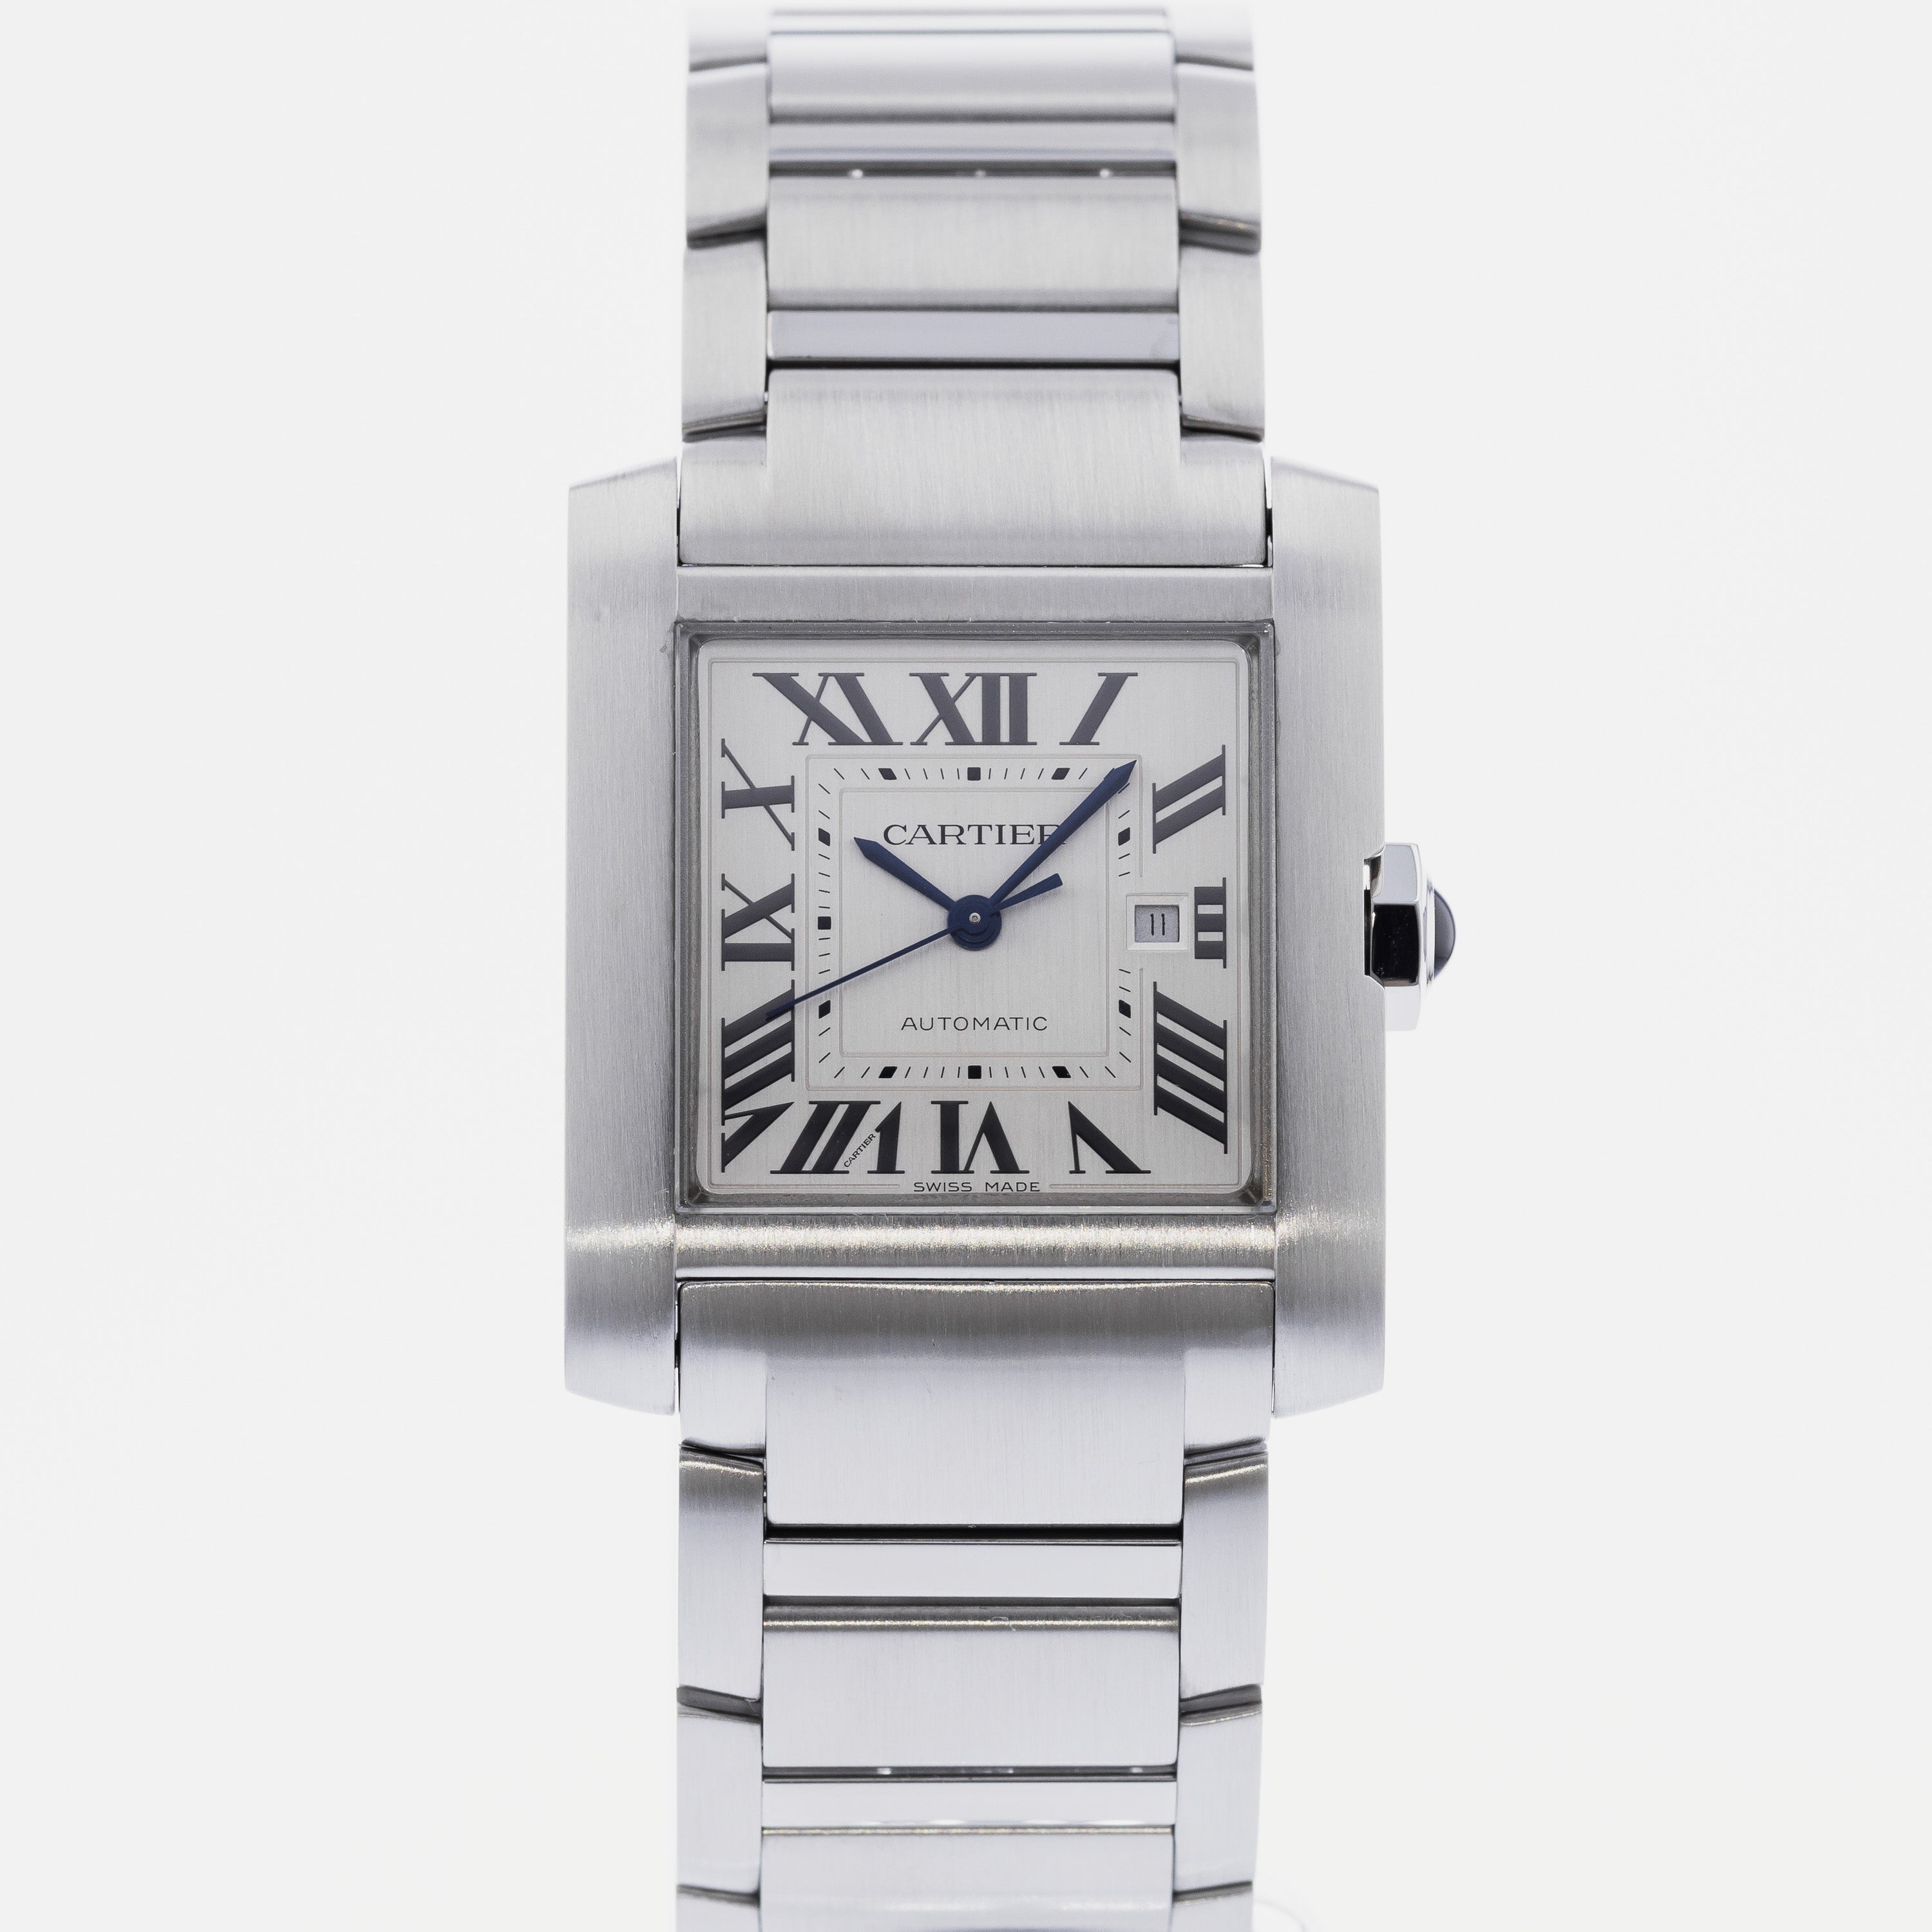 Cartier Tank Francaise Automatic Men's Stainless Steel Watch W51002Q3